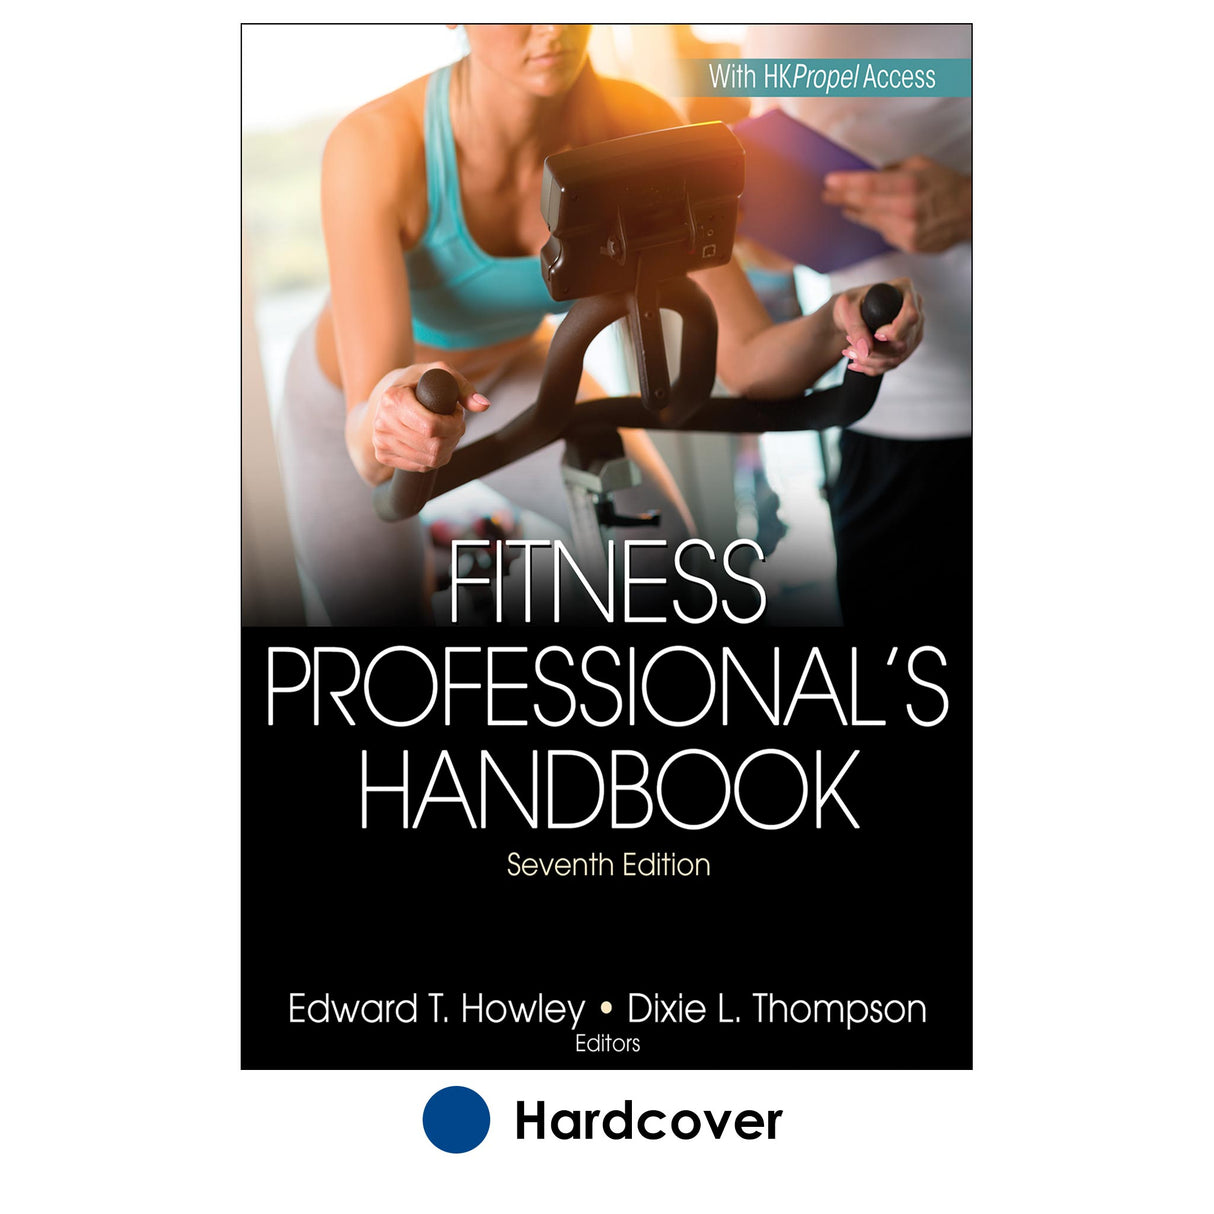 Fitness Professional's Handbook 7th Edition With HKPropel Access